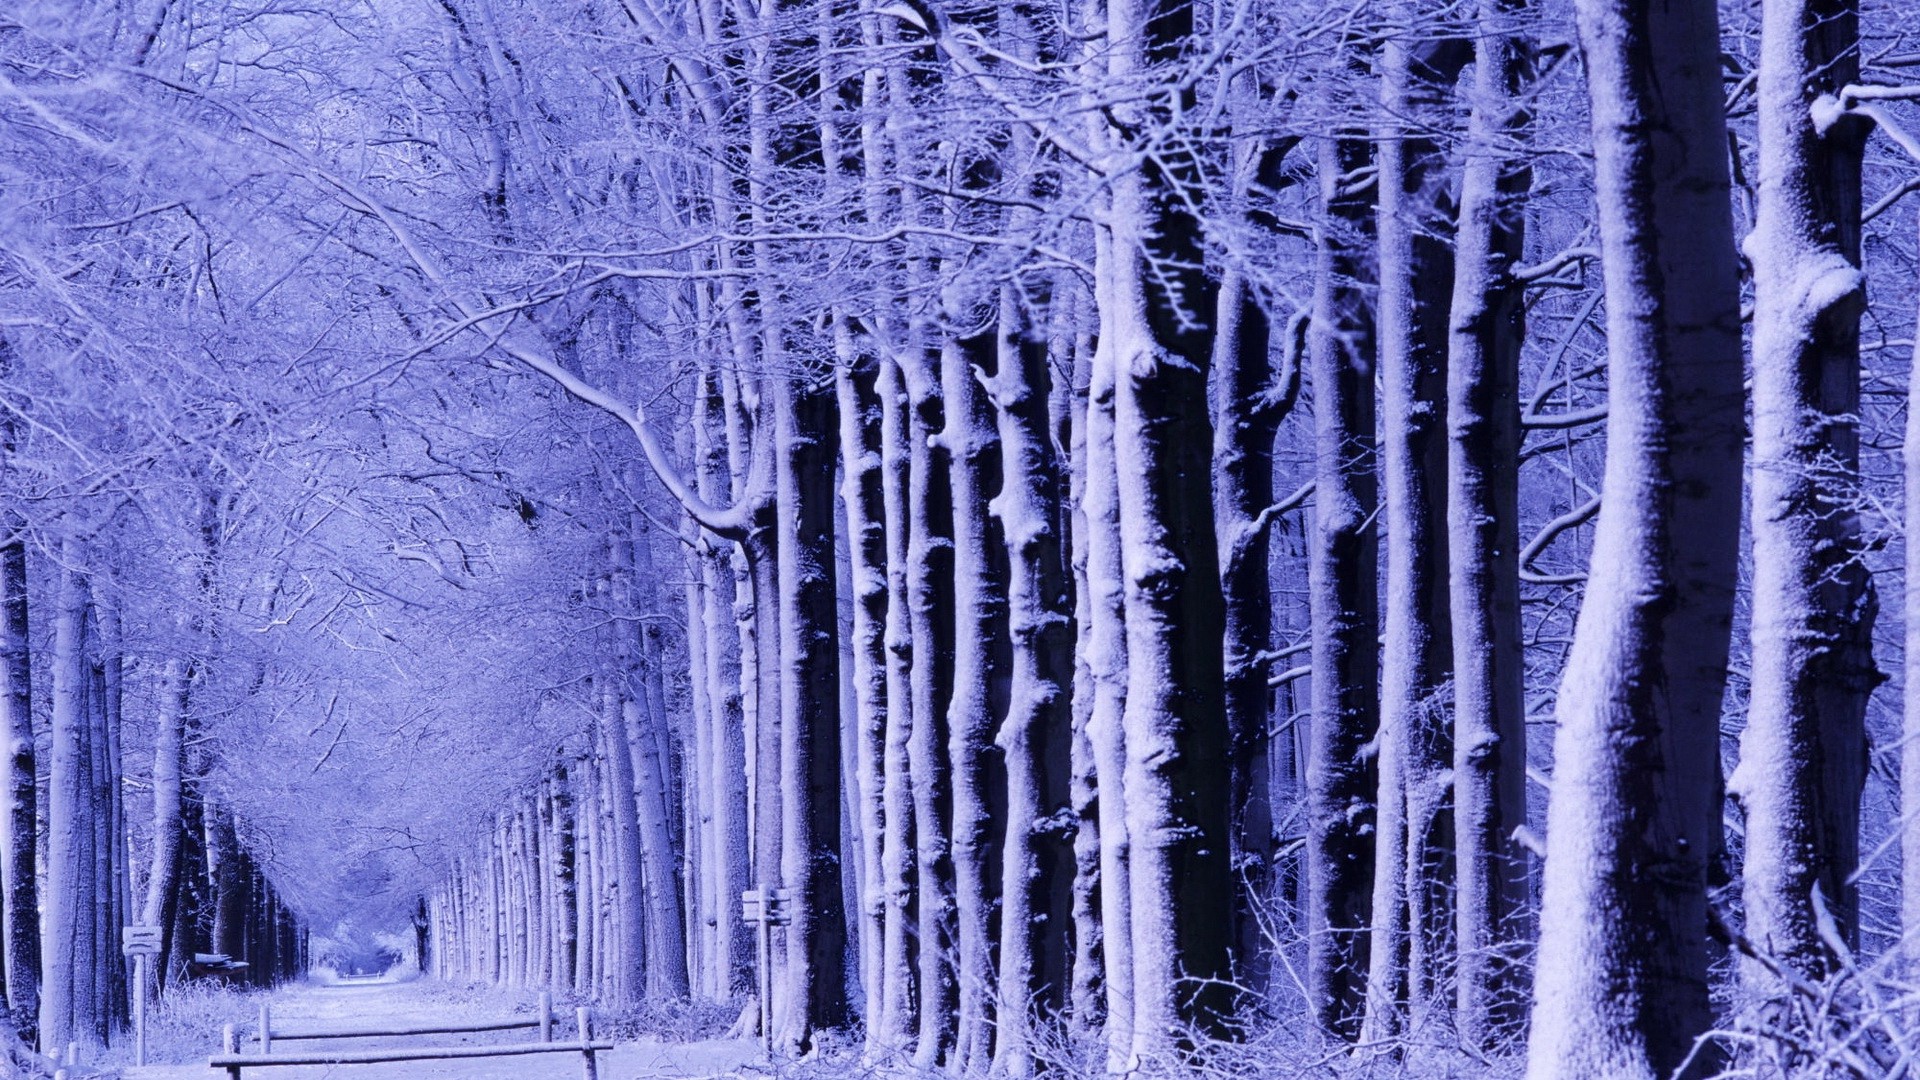 1920x1080 wallpapers: winter, park, bench, trees, hoarfrost (image)